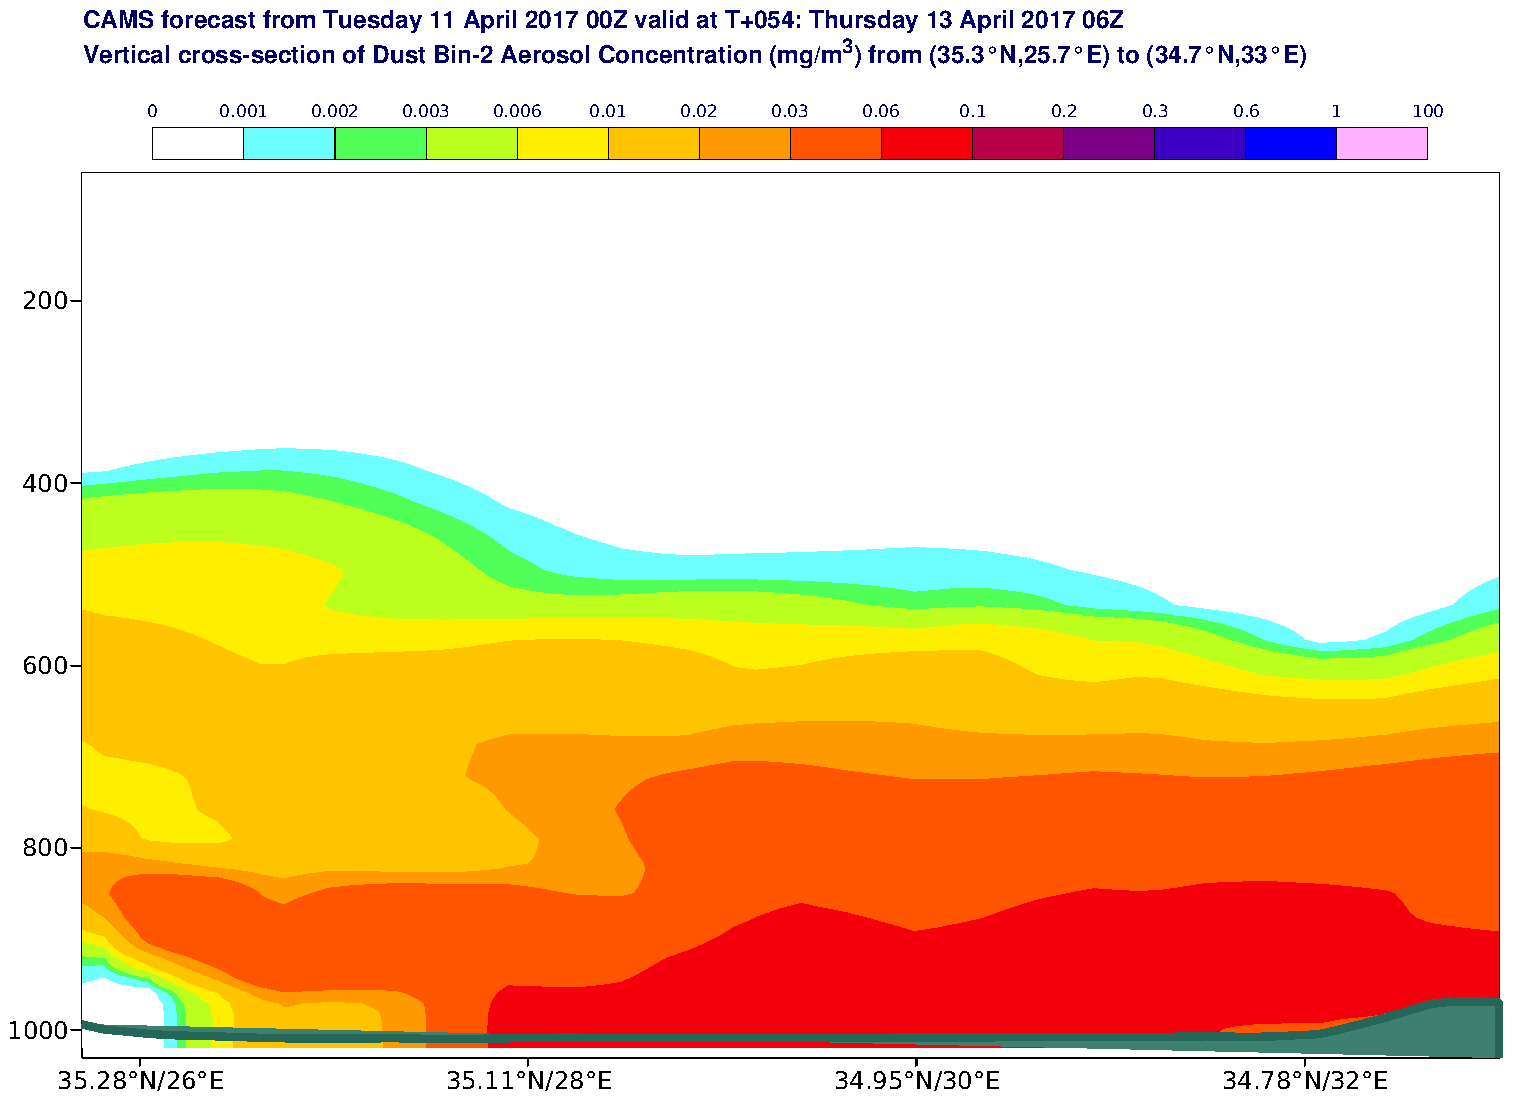 Vertical cross-section of Dust Bin-2 Aerosol Concentration (mg/m3) valid at T54 - 2017-04-13 06:00